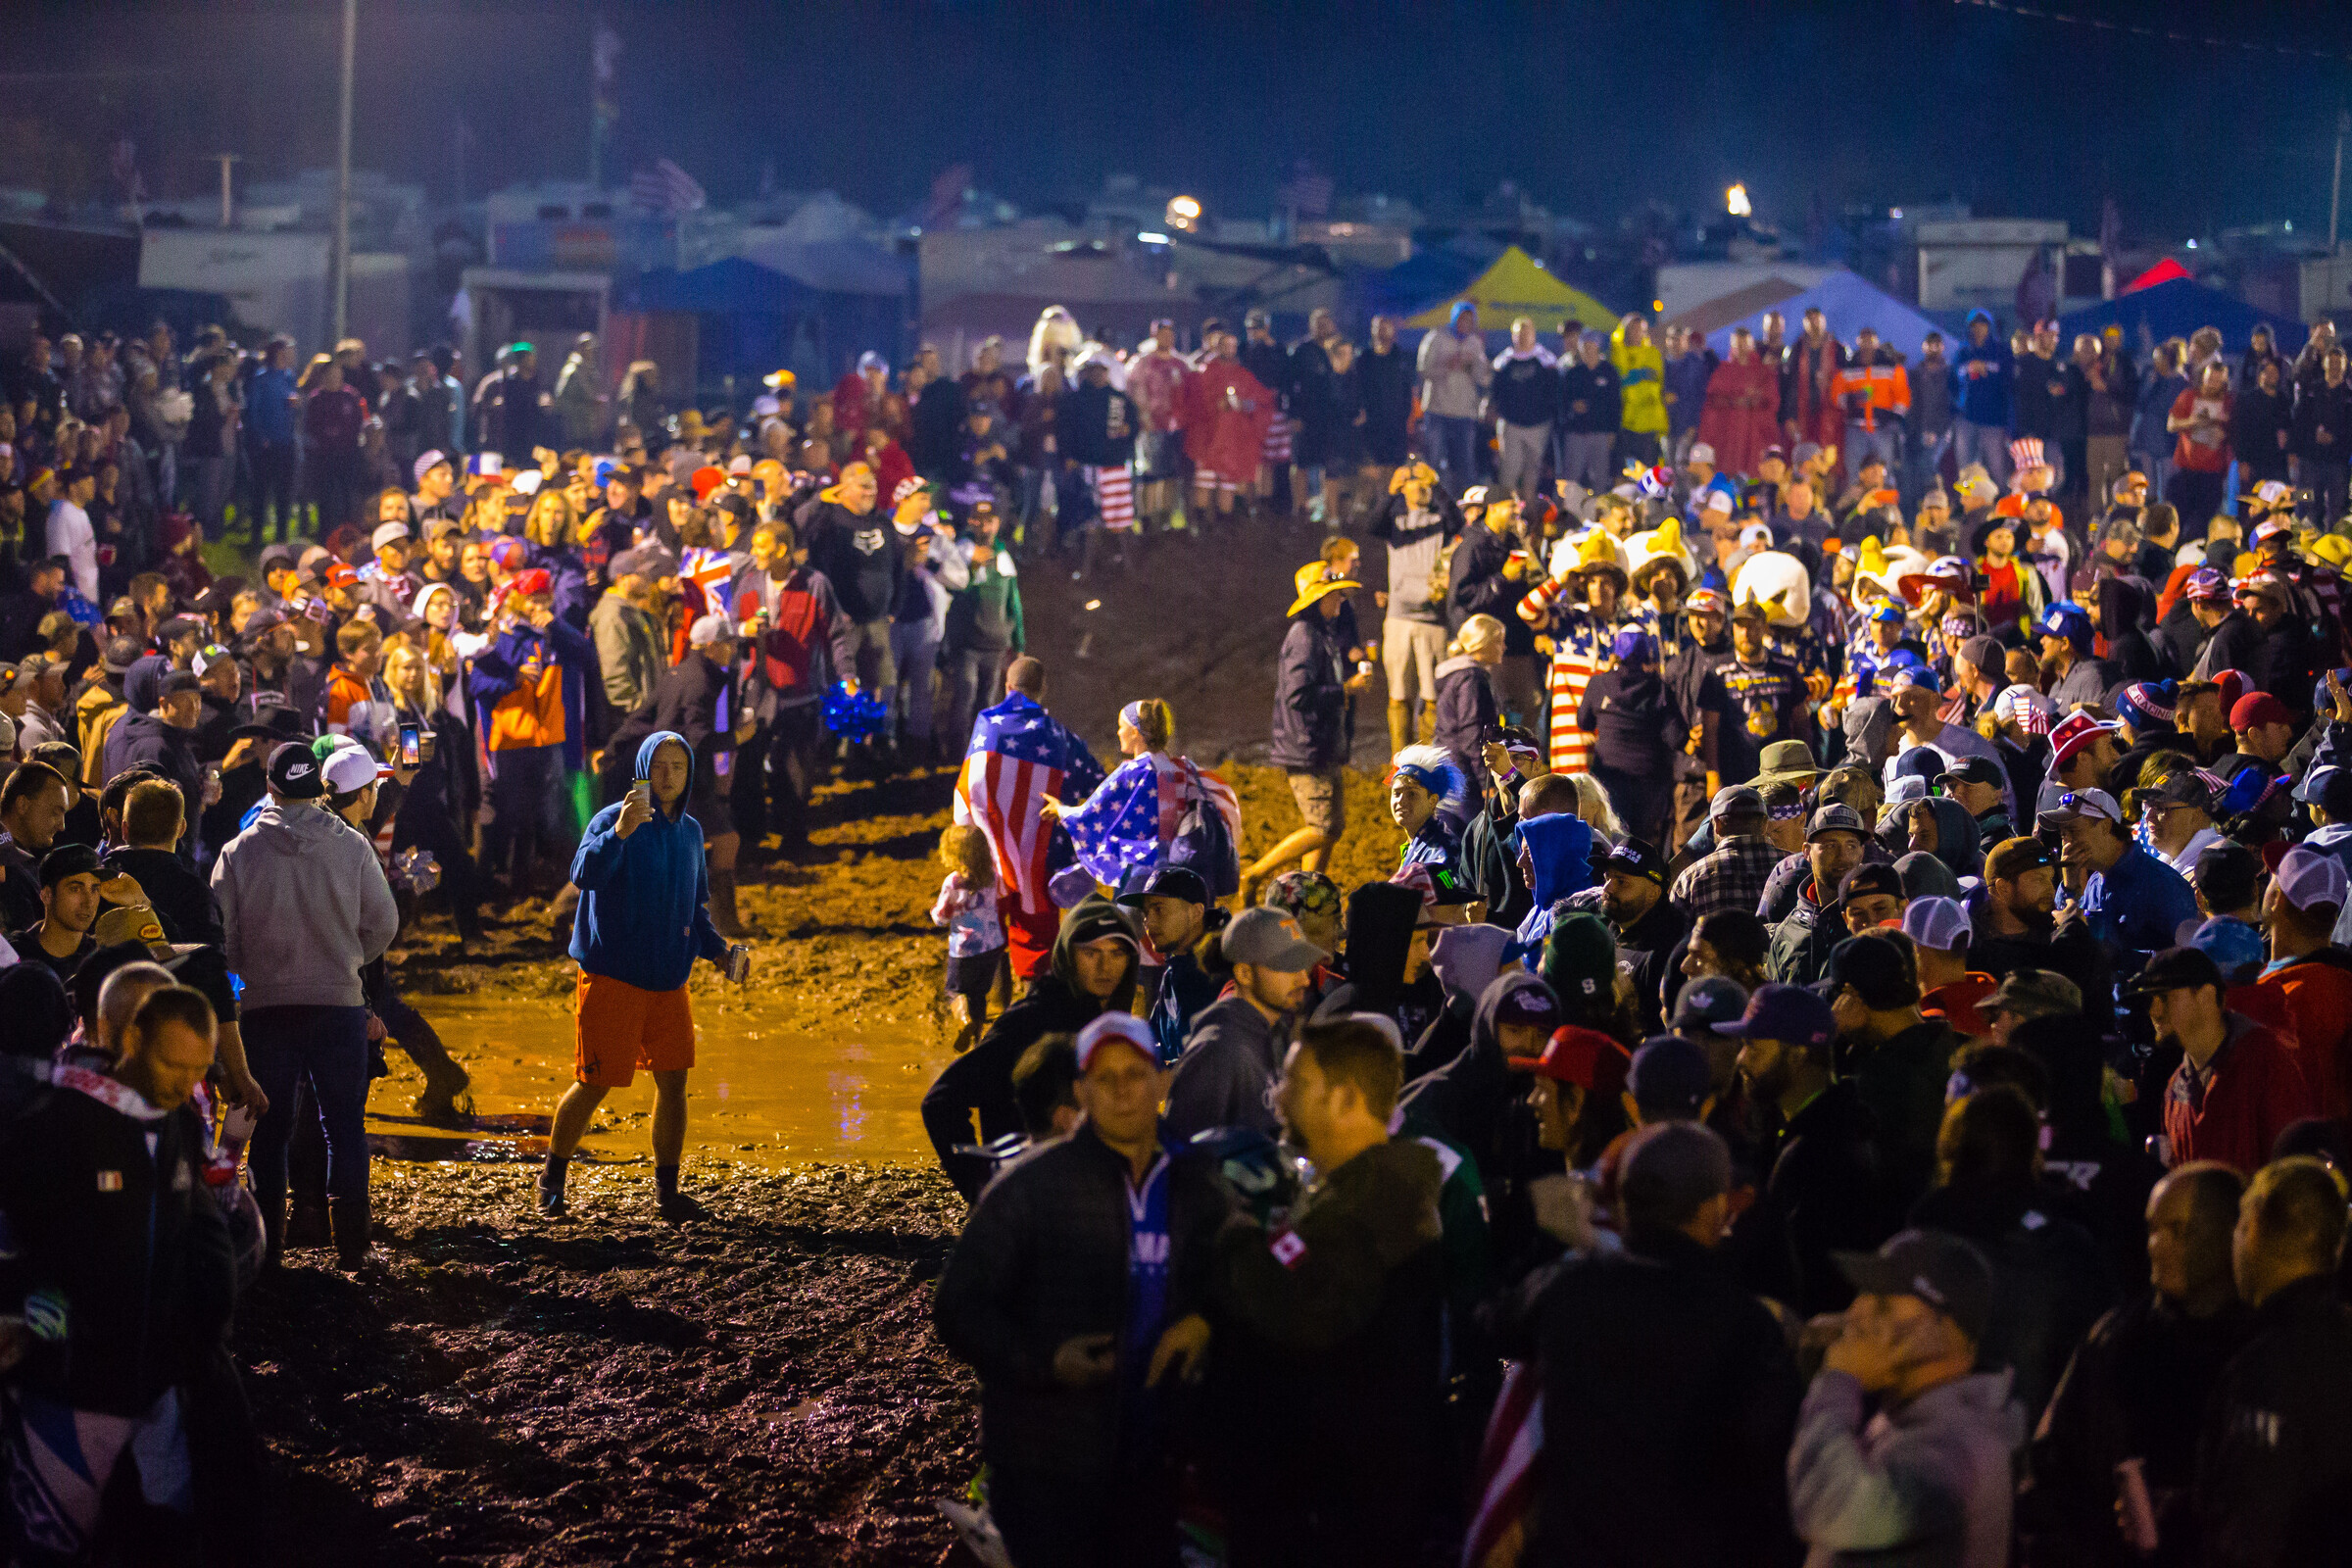 Watch Our Live Shows From RedBud Friday and Saturday at 730 p.m